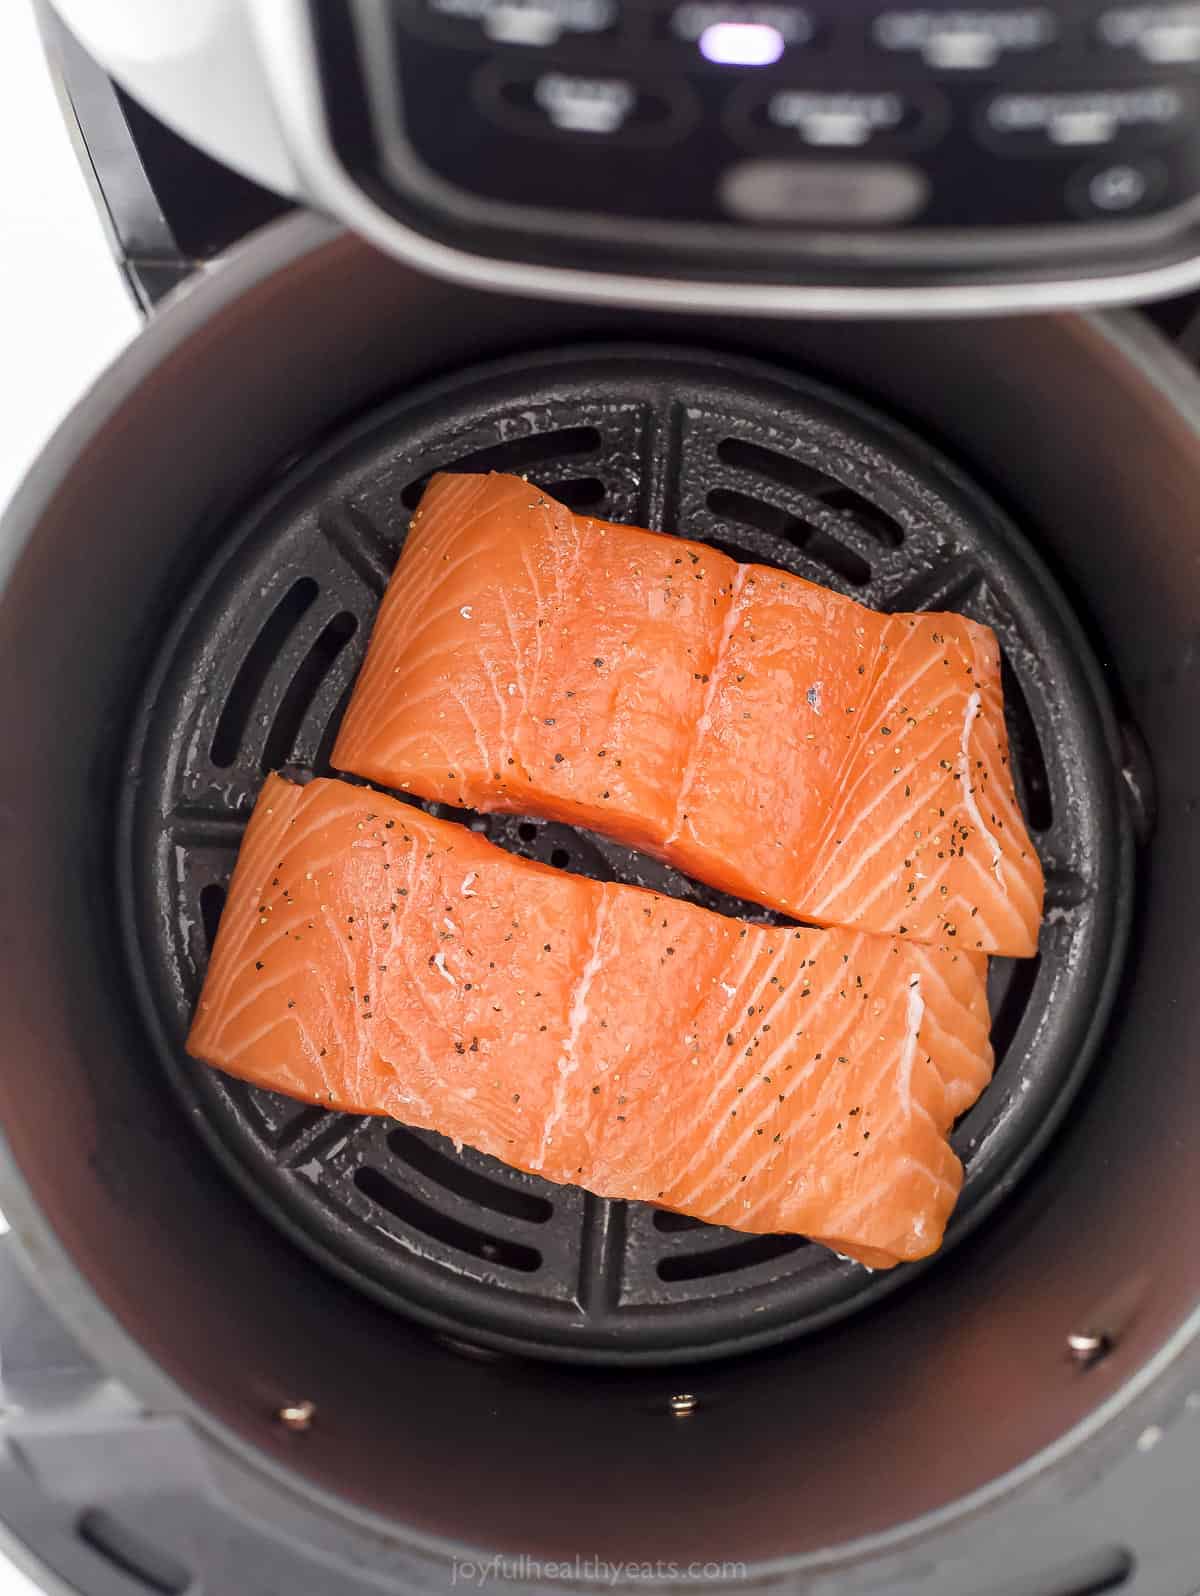 Two filets of salmon seasoned with salt and pepper.